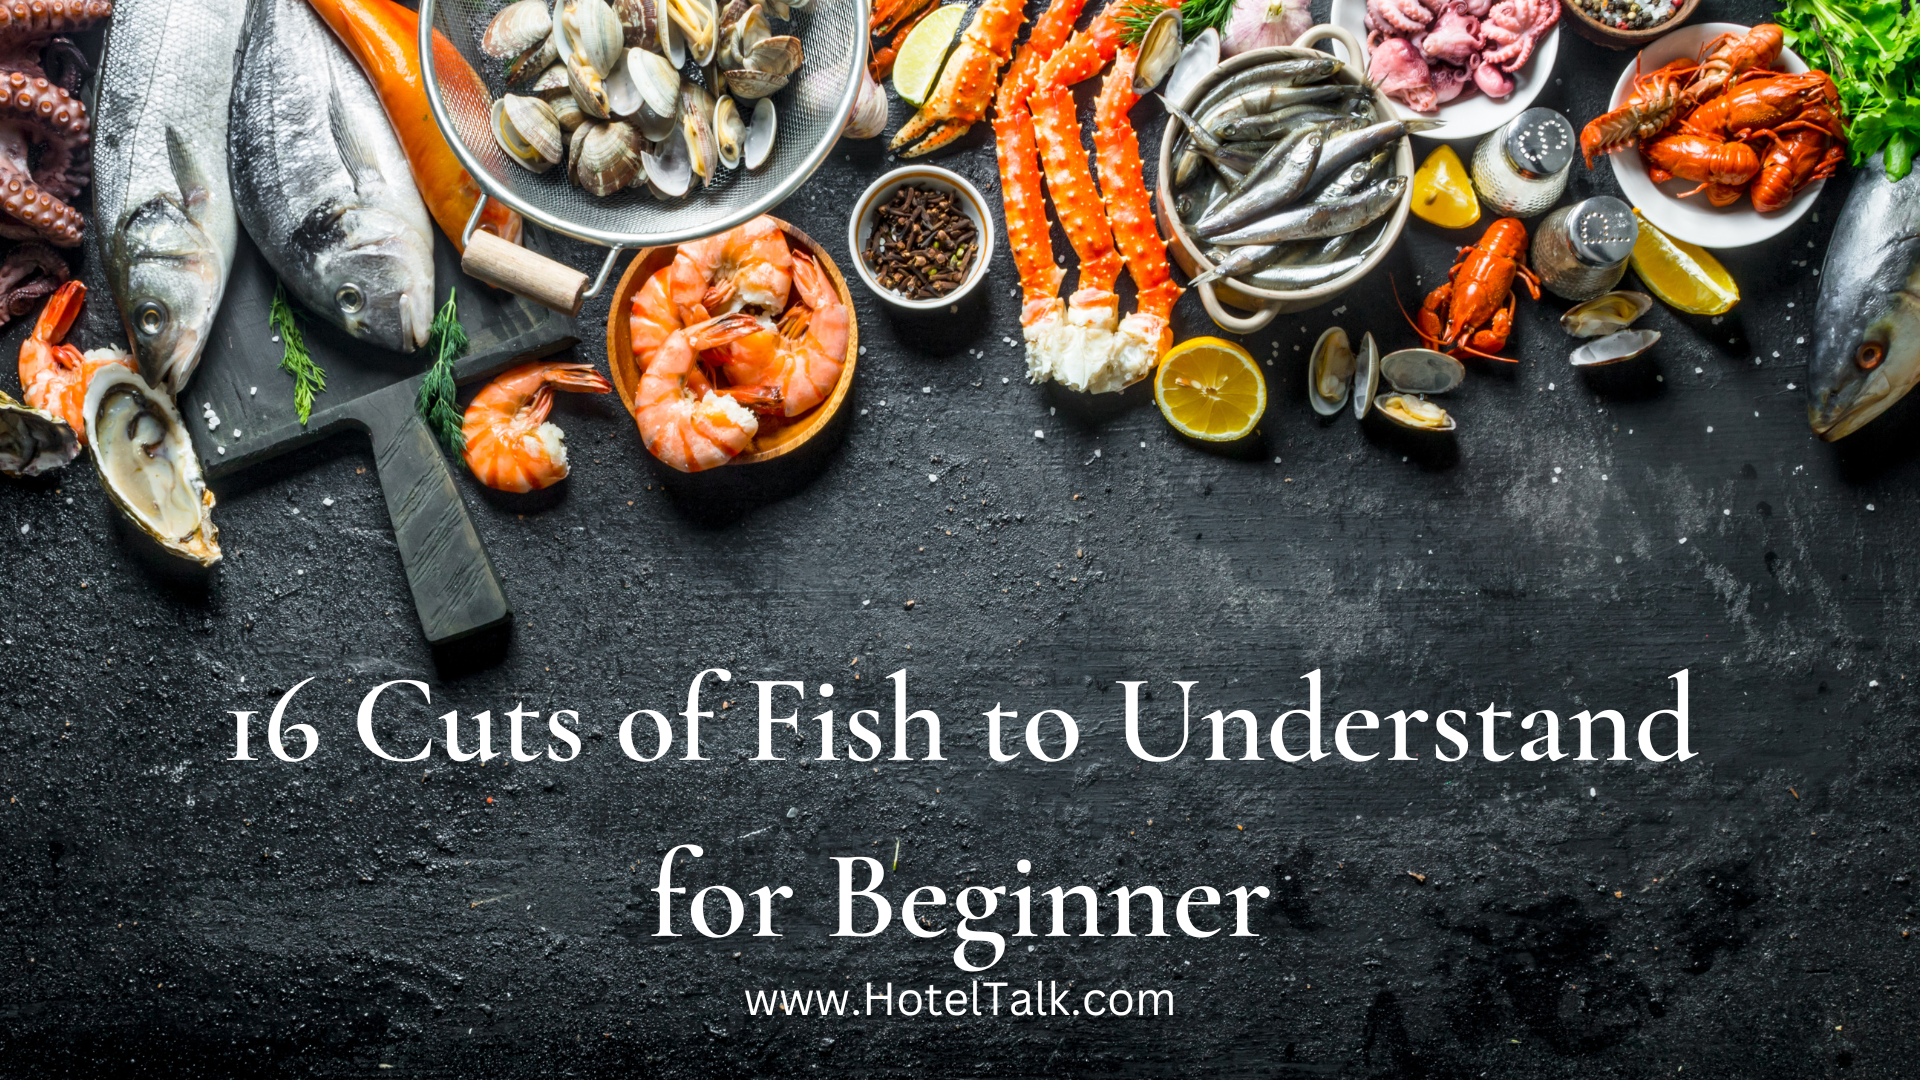 16 Cuts of Fish to Understand for Beginner 1